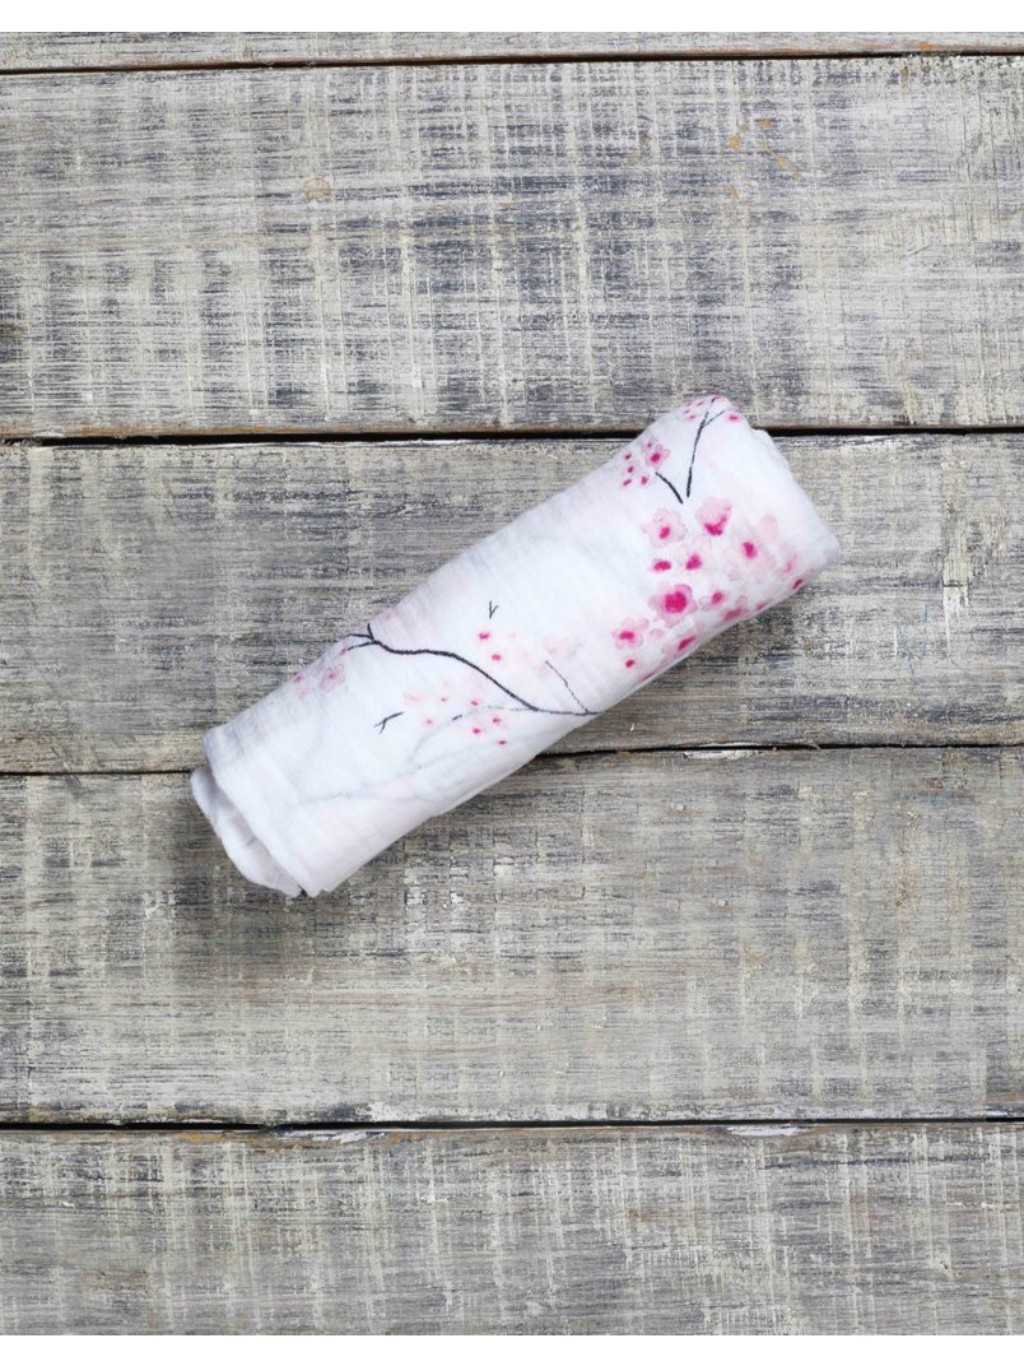 Malabar_Baby_Cherry_Blosson_Baby_Swaddle_Blanket_Product_Image